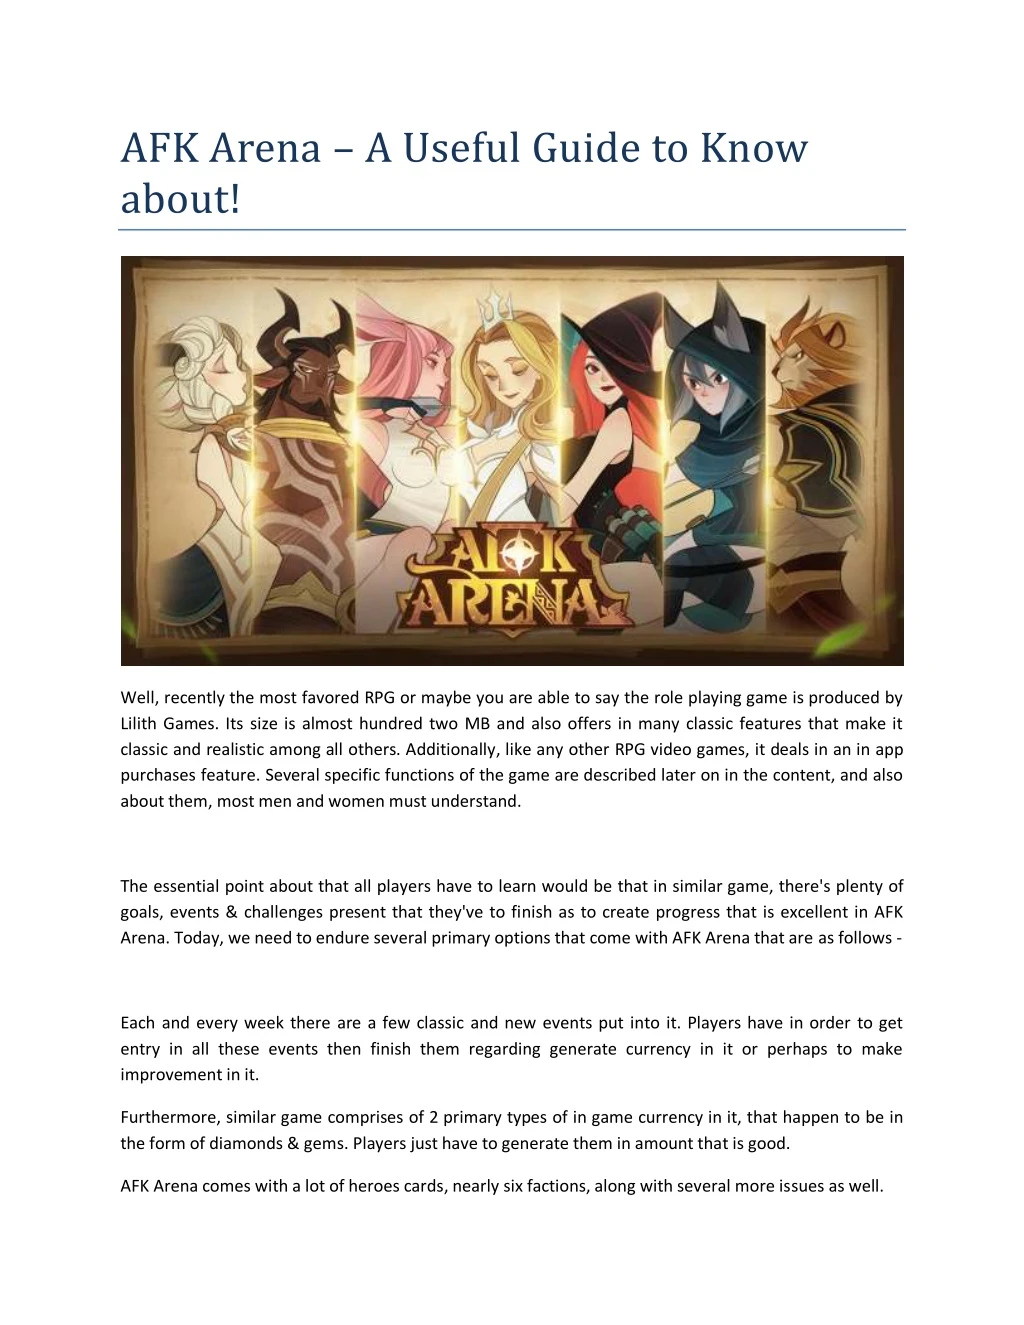 afk arena a useful guide to know about